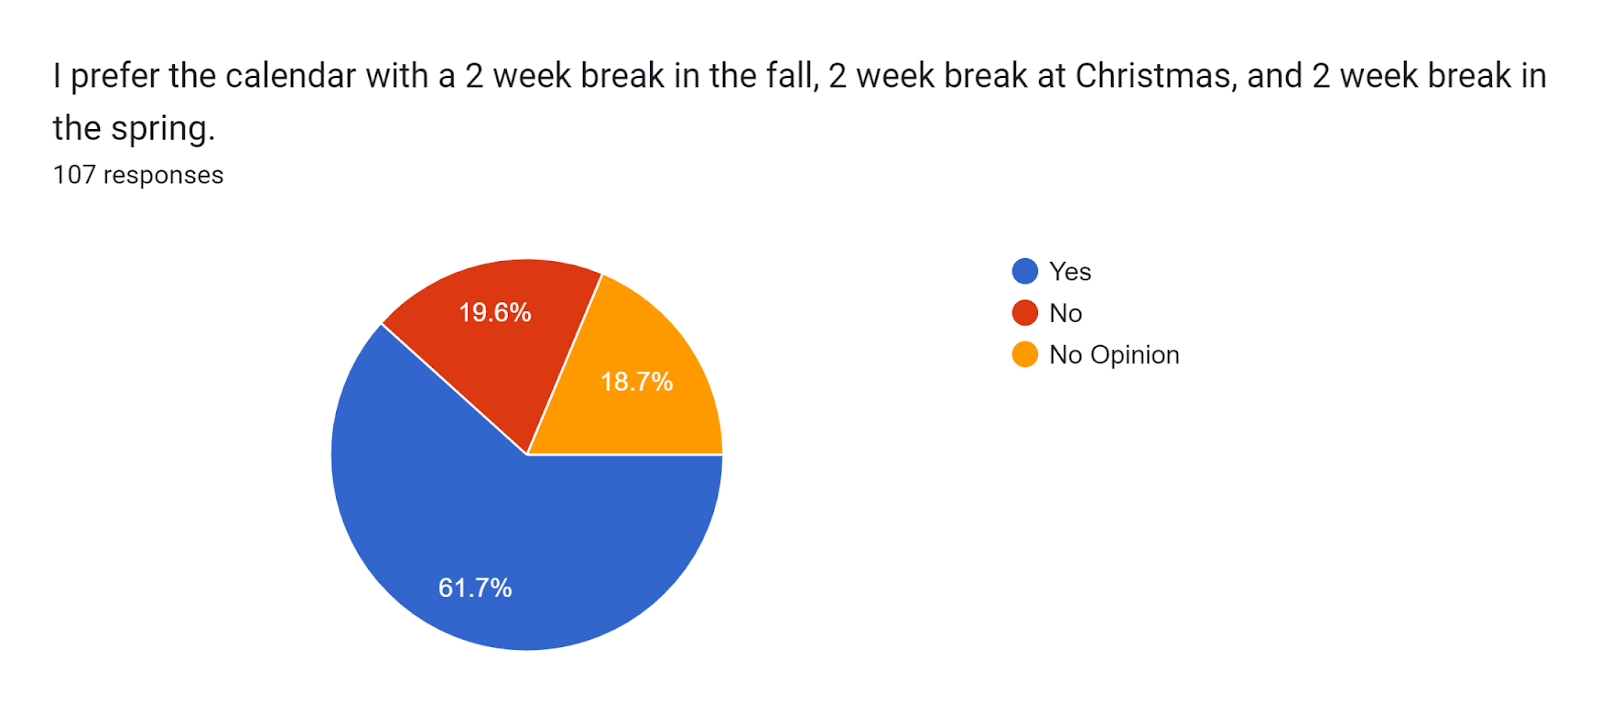 Forms response chart. Question title: I prefer the calendar with a 2 week break in the fall, 2 week break at Christmas, and 2 week break in the spring. . Number of responses: 107 responses.